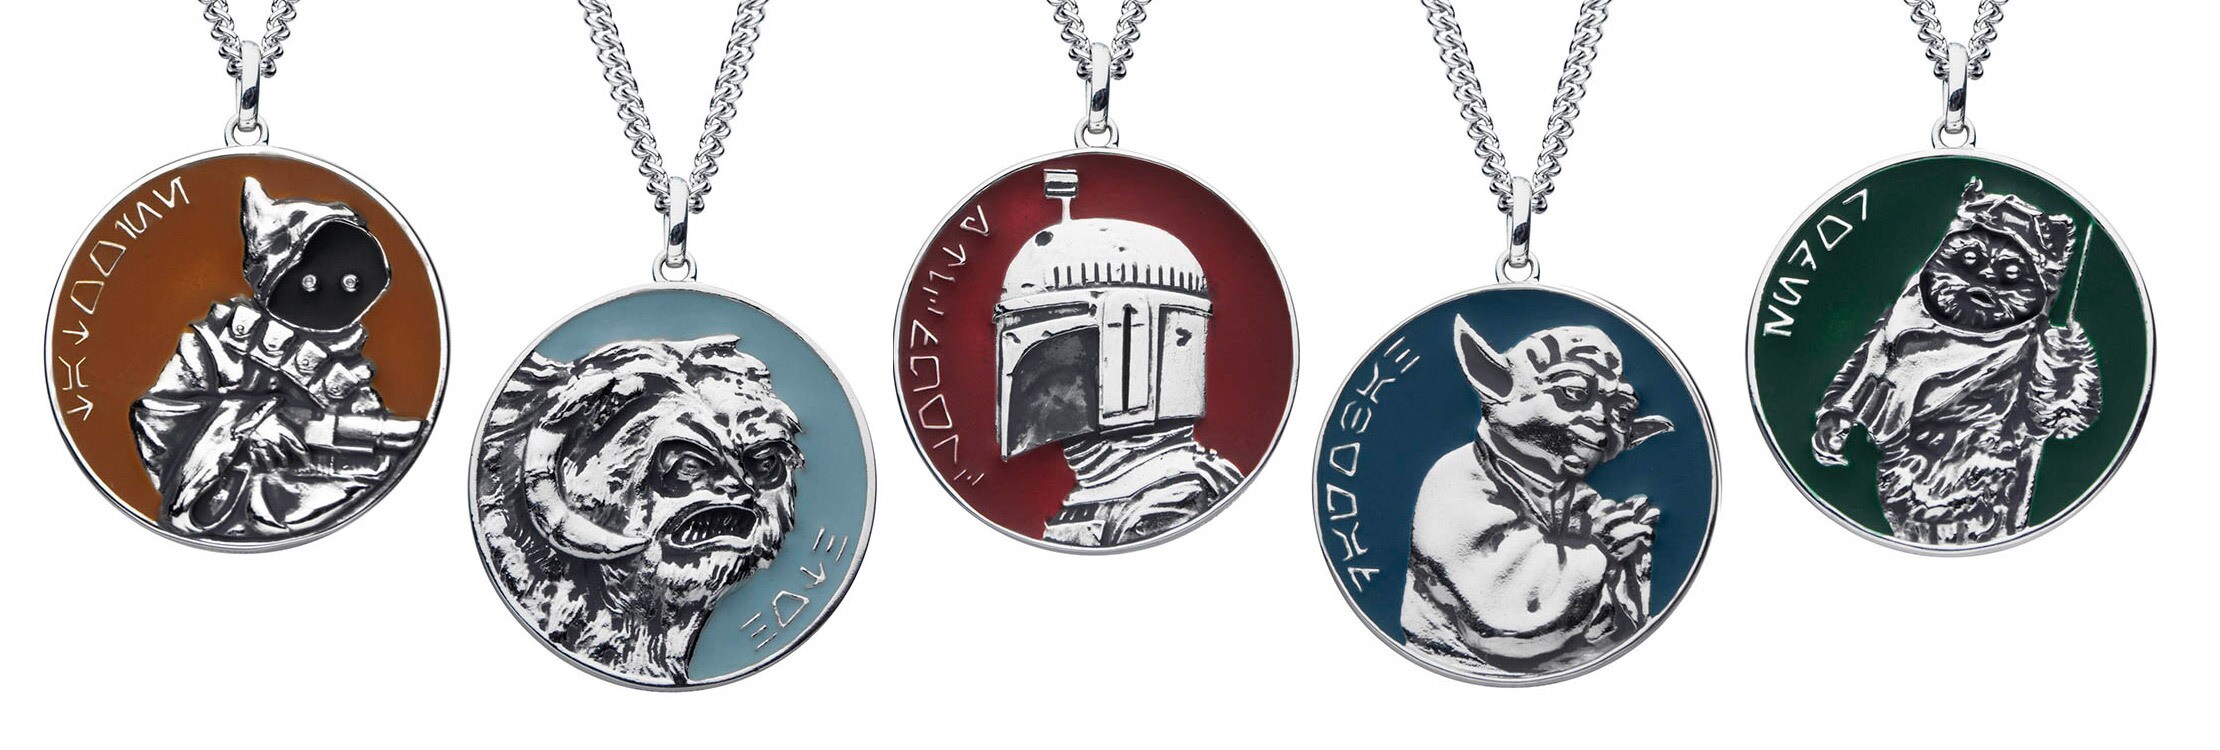 Planetary medallions from the new RockLove X Star Wars collection.